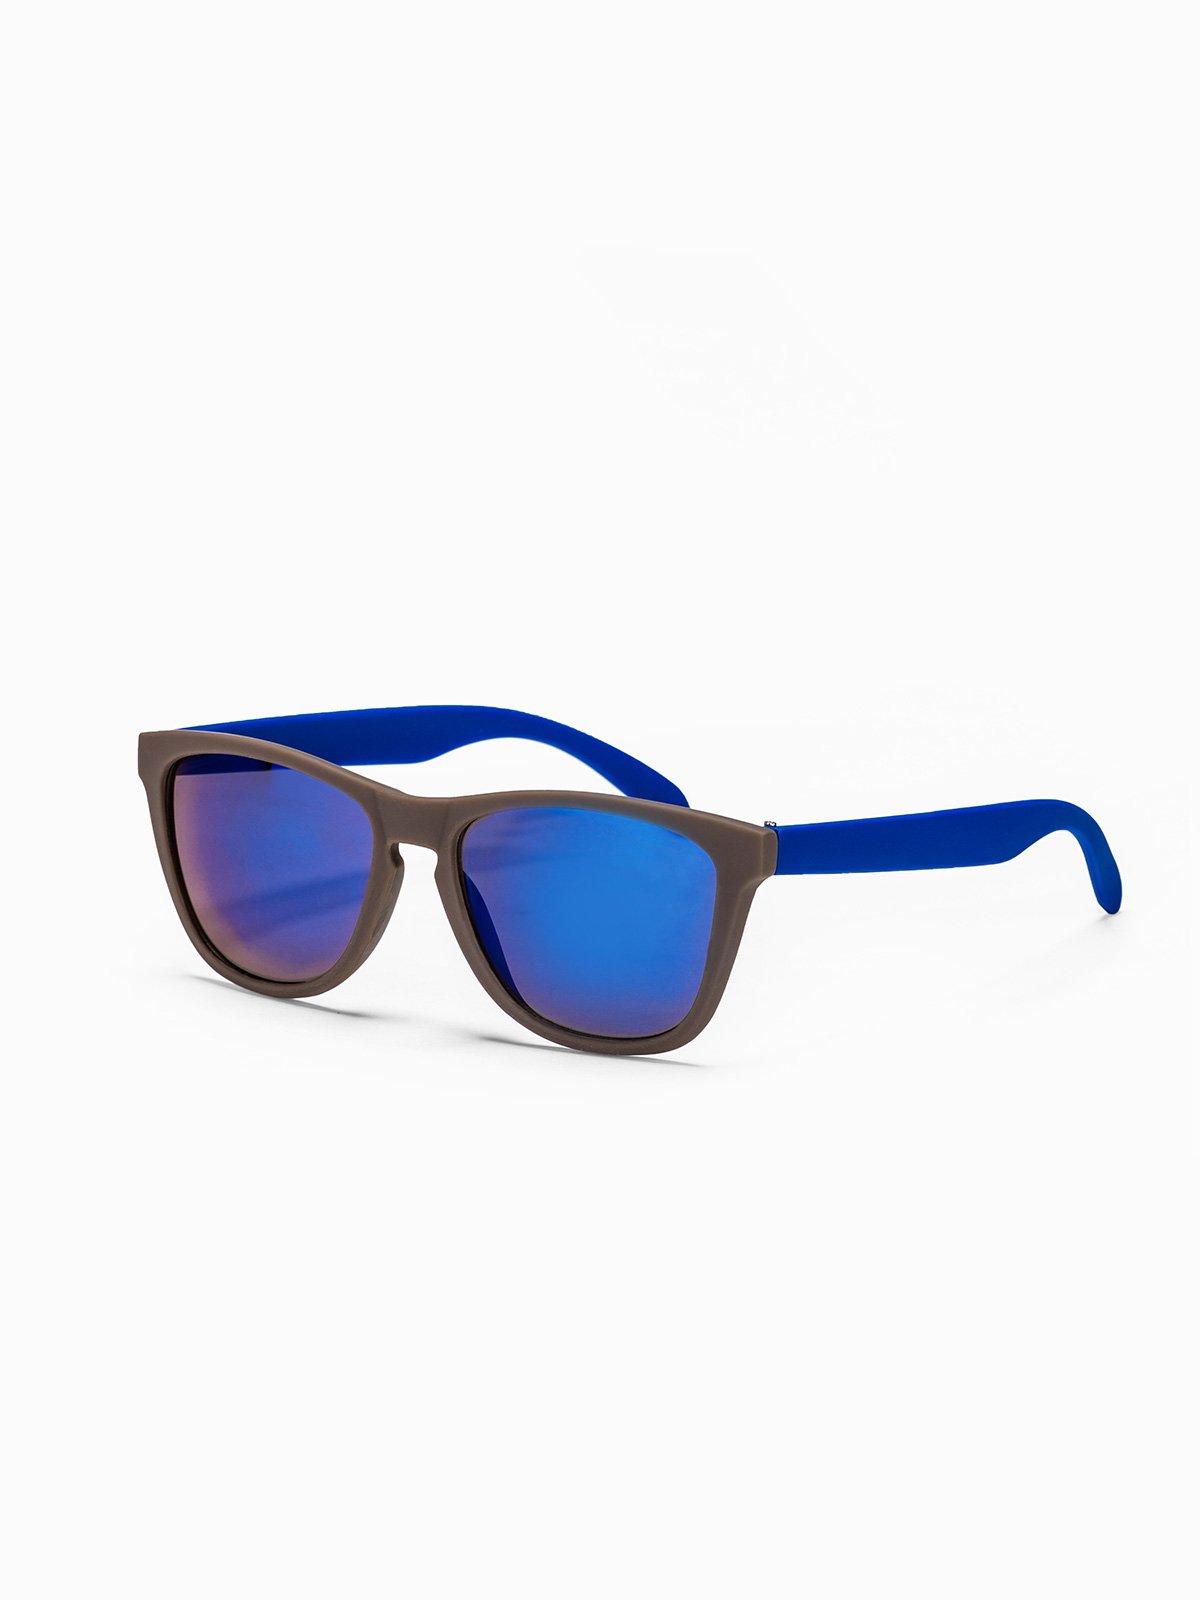 Sunglasses A169 - beige/navy | MODONE wholesale - Clothing For Men